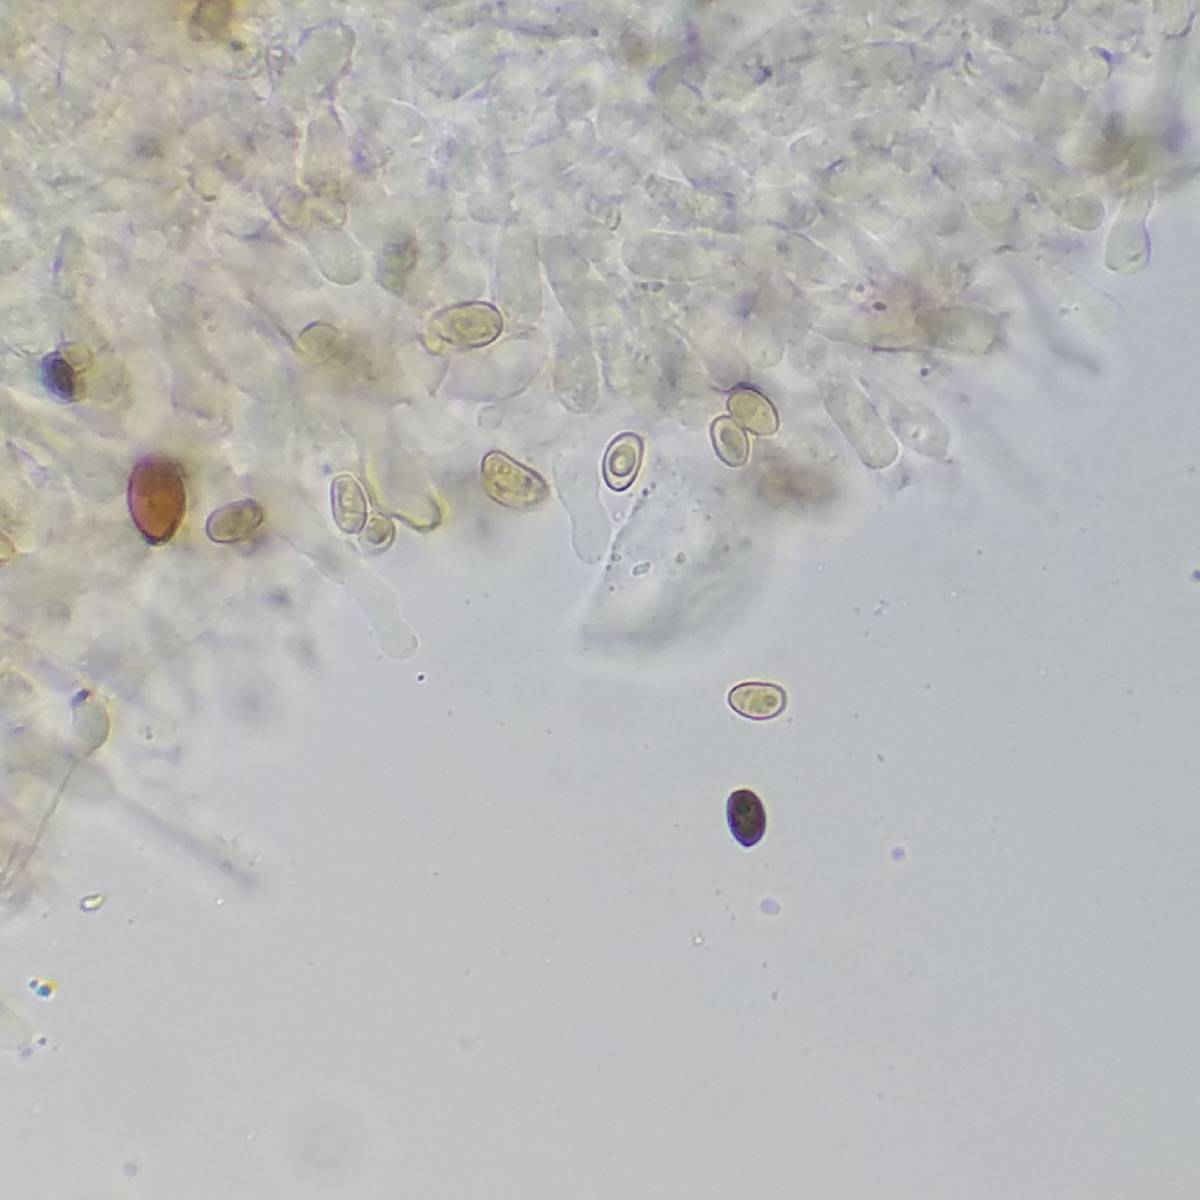 Meottomyces image